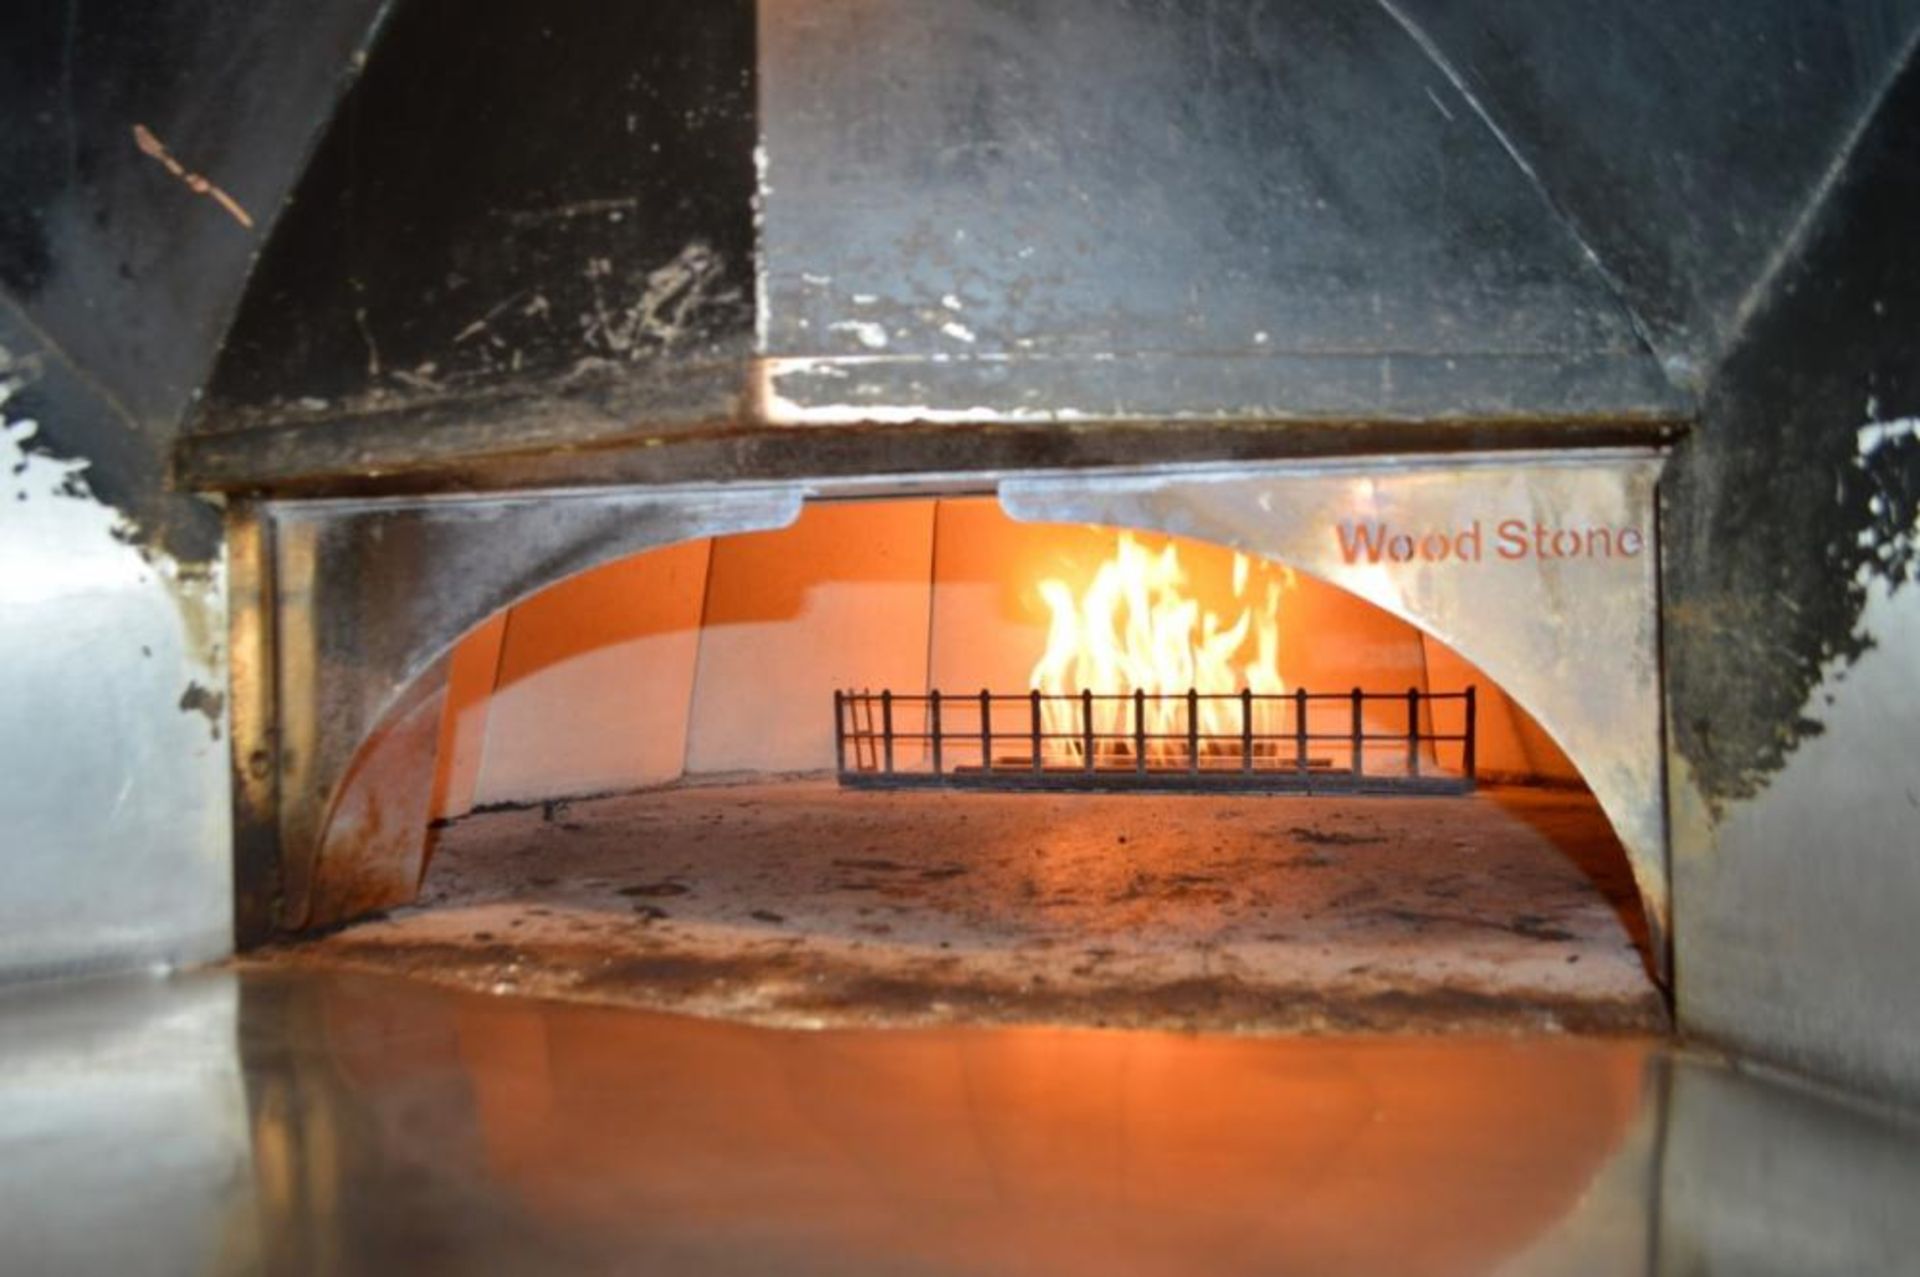 1 x Wood Stone Commercial Gas Fired Pizza Oven - CL011 - Location: Altrincham WA14 - Image 8 of 16